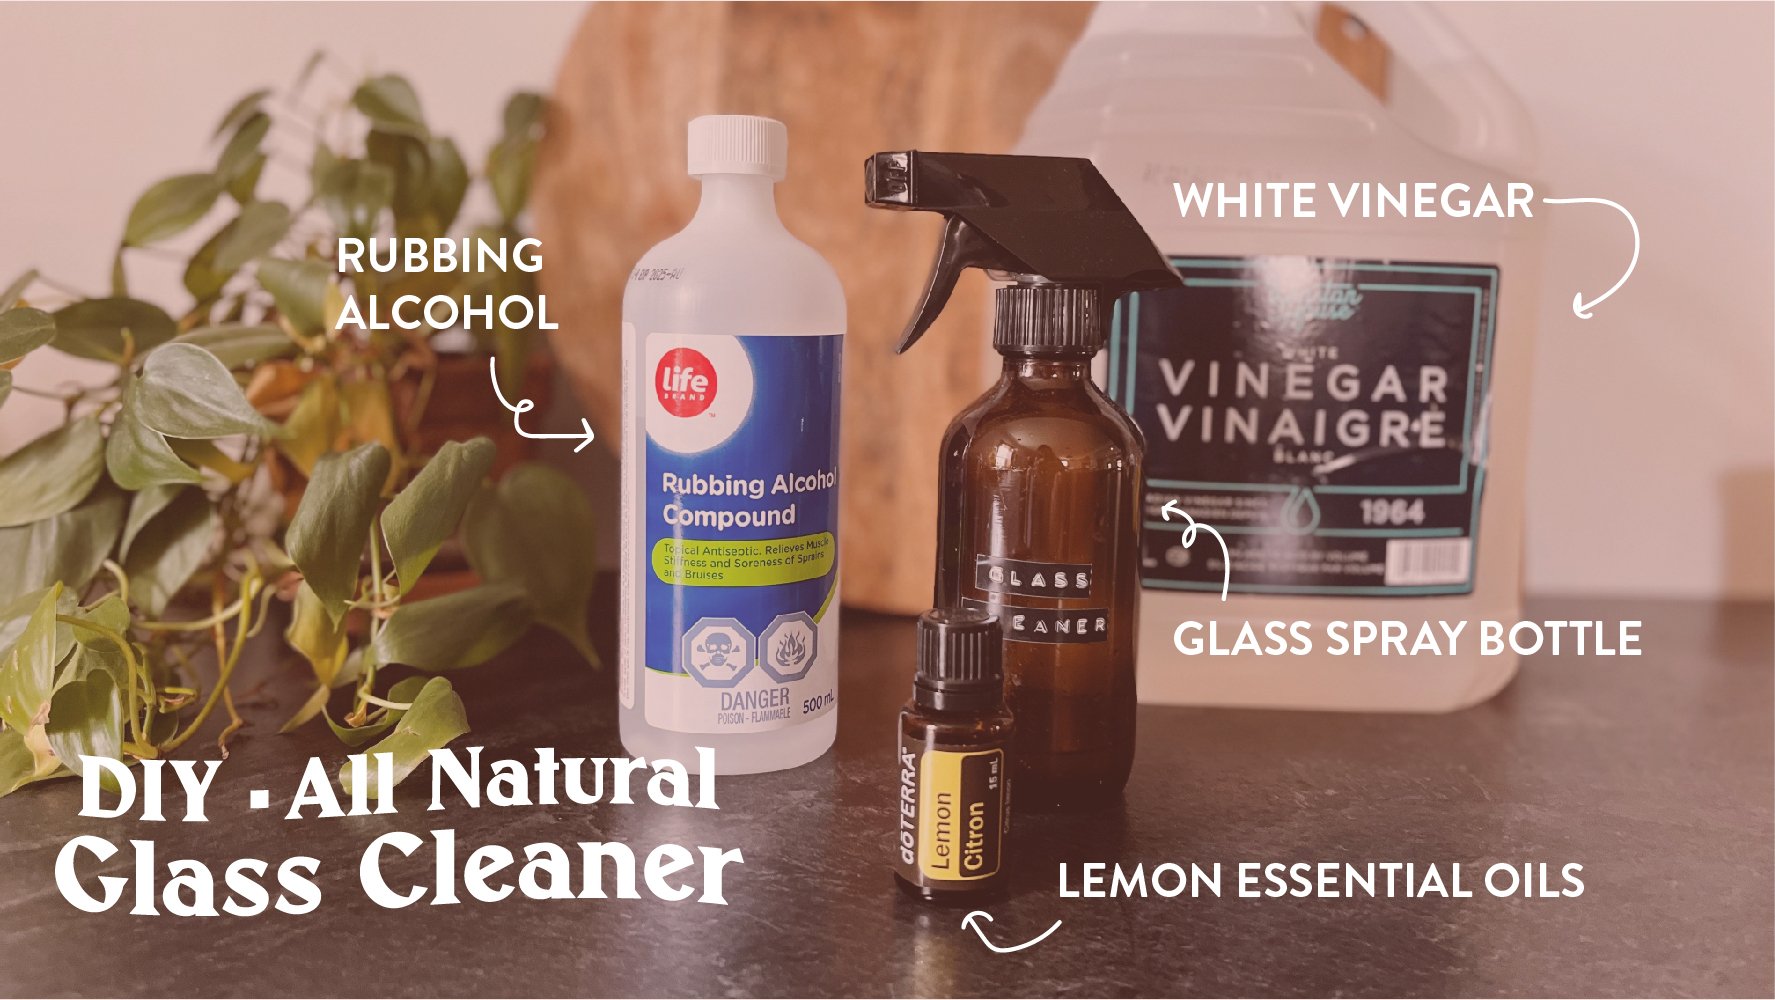 DIY, all natural Glass Cleaner ingredient include rubbing alcohol, white vinegar, glass spray bottle and lemon essential oils